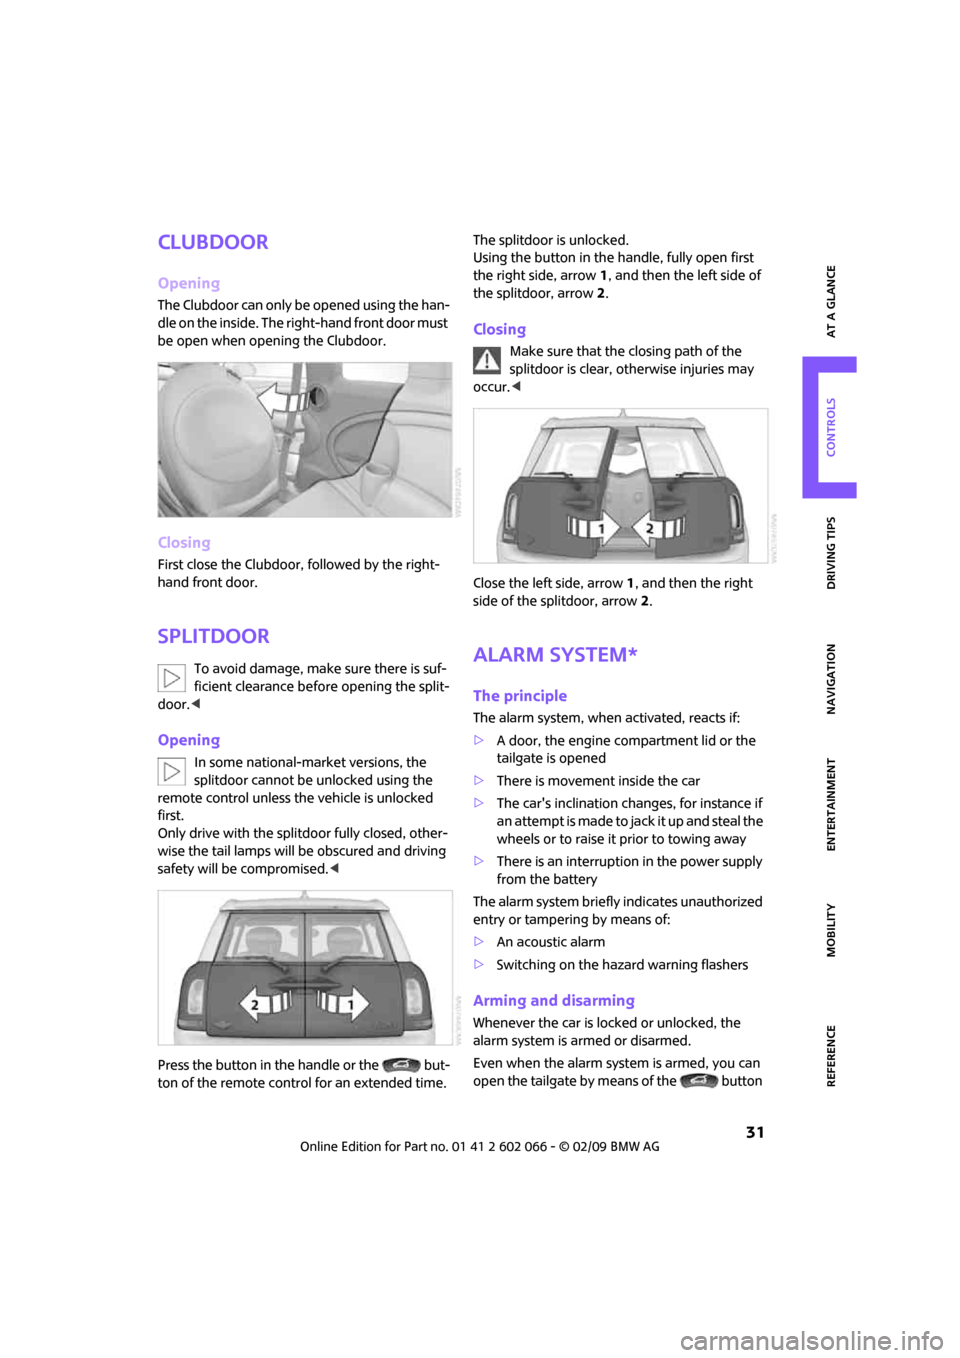 MINI Clubman 2009   (Mini Connected) Owners Guide MOBILITYAT A GLANCE CONTROLS DRIVING TIPS ENTERTAINMENT
 31
NAVIGATION REFERENCE
Clubdoor
Opening
The Clubdoor can only be opened using the han-
dle on the inside. The right-hand front door must 
be o